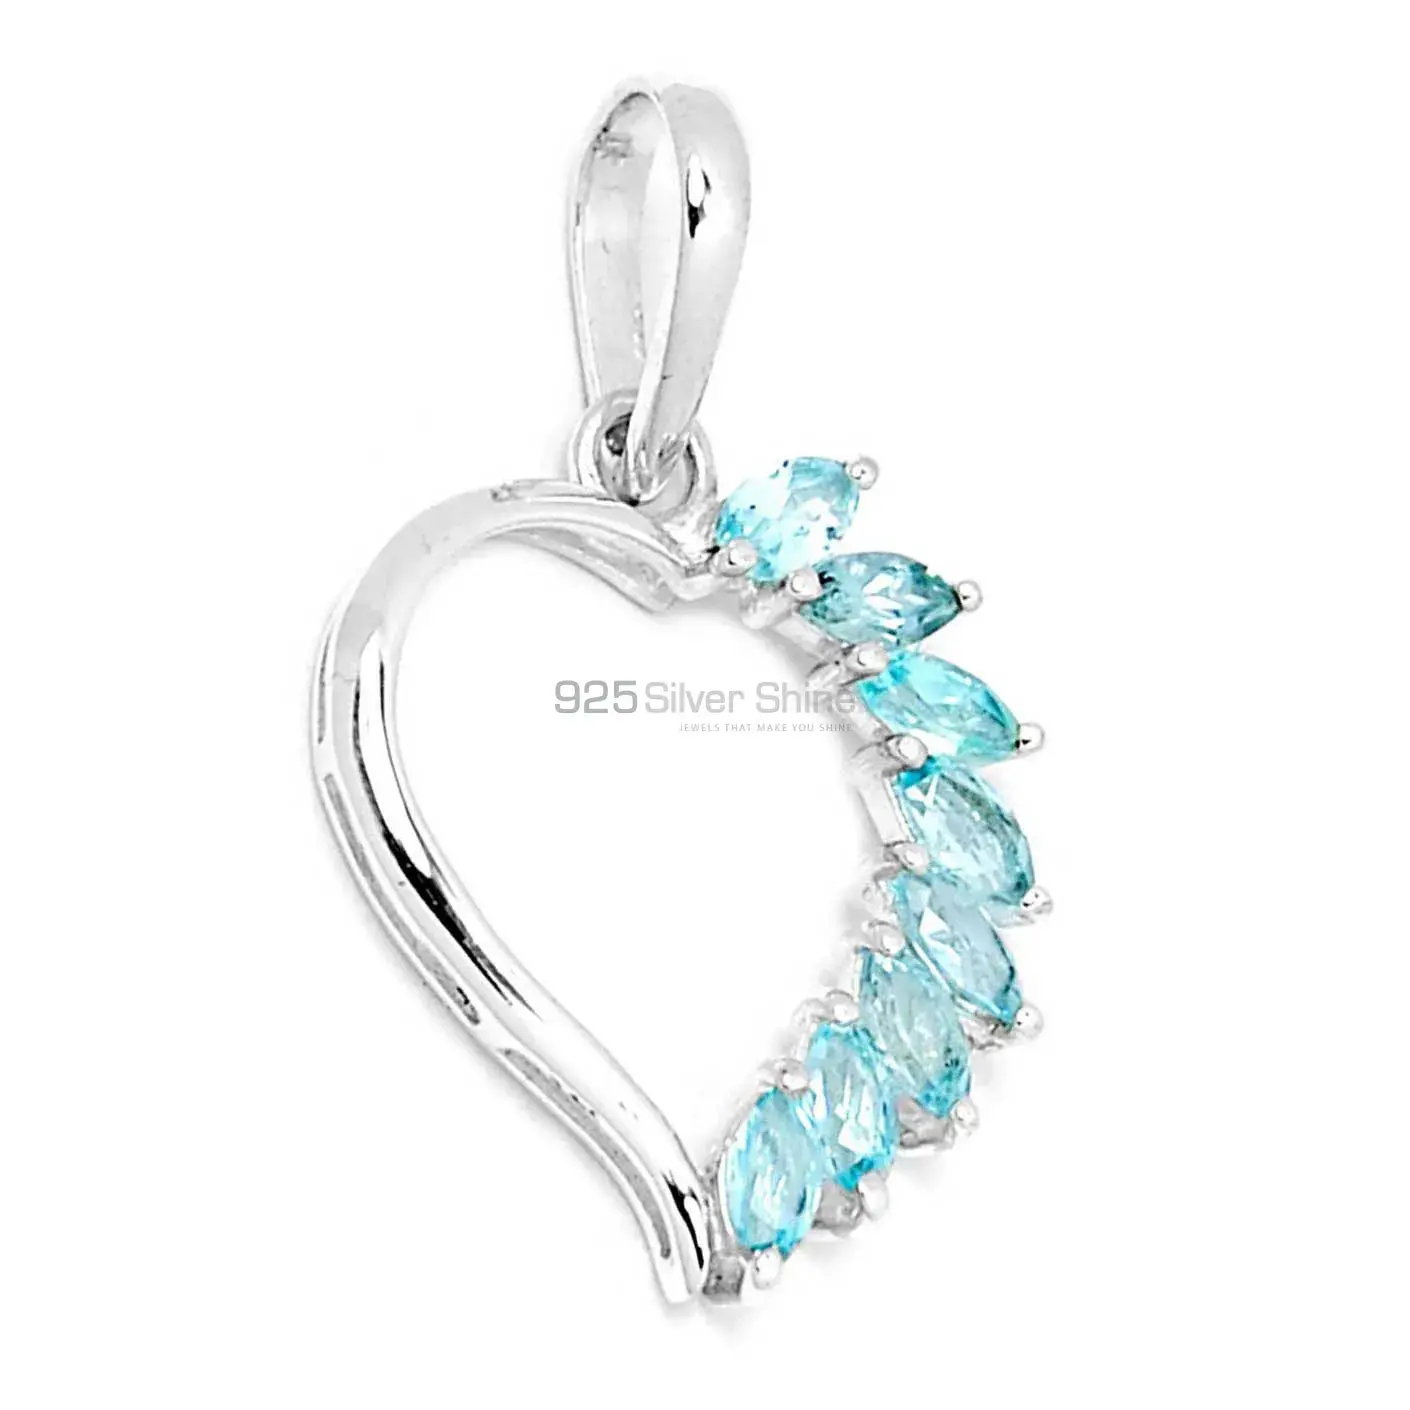 Top Quality 925 Solid Silver Pendants Exporters In Blue Topaz Gemstone Jewelry 925SSP304-2_0